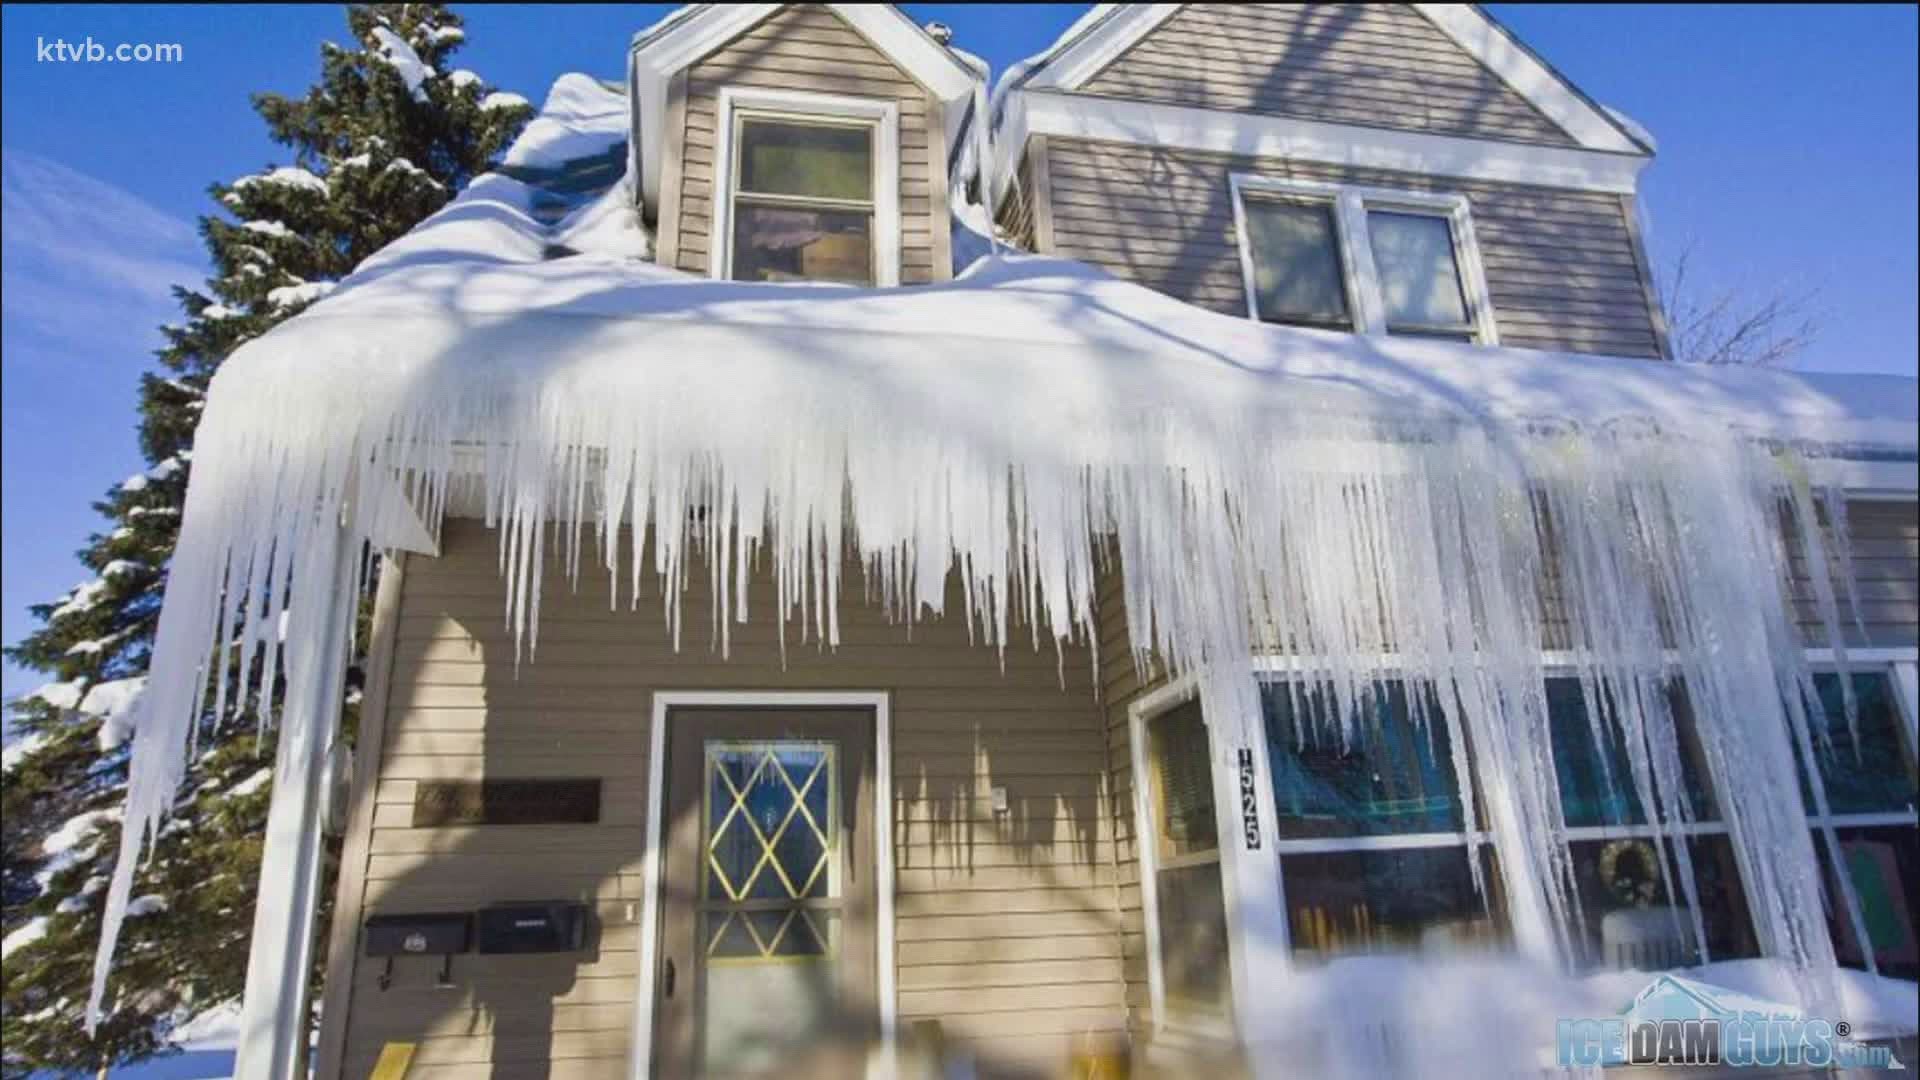 “The very best way to prevent ice dams from happening is stop them before they happen."